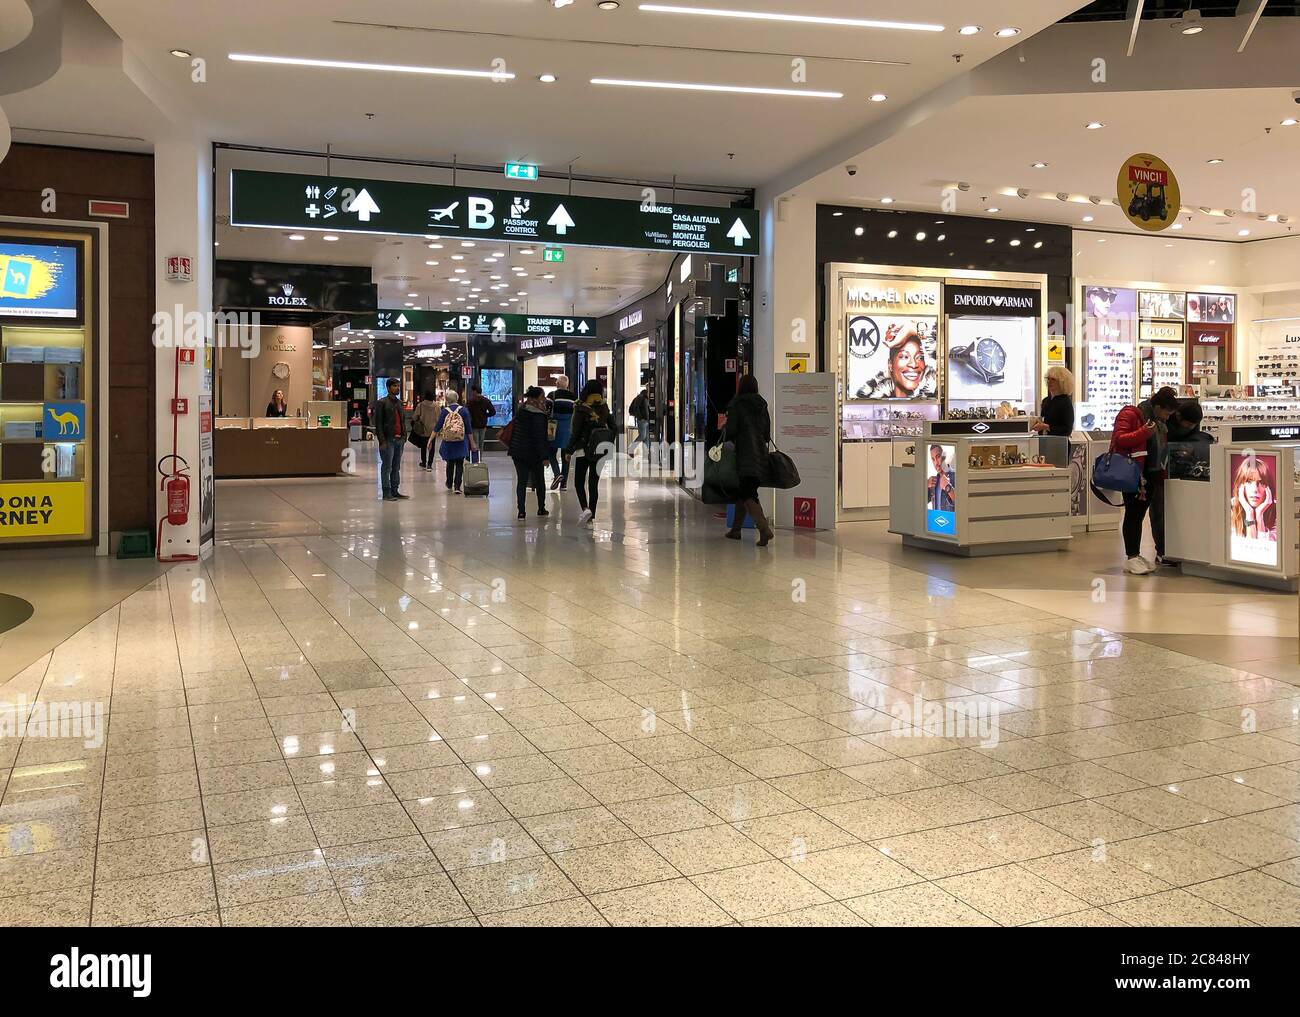 Ferno, Milan-Malpensa, Italy - February 8, 2020: Interiors with shops and bars in the Terminal 1 of Milan-Malpensa International Airport. Stock Photo